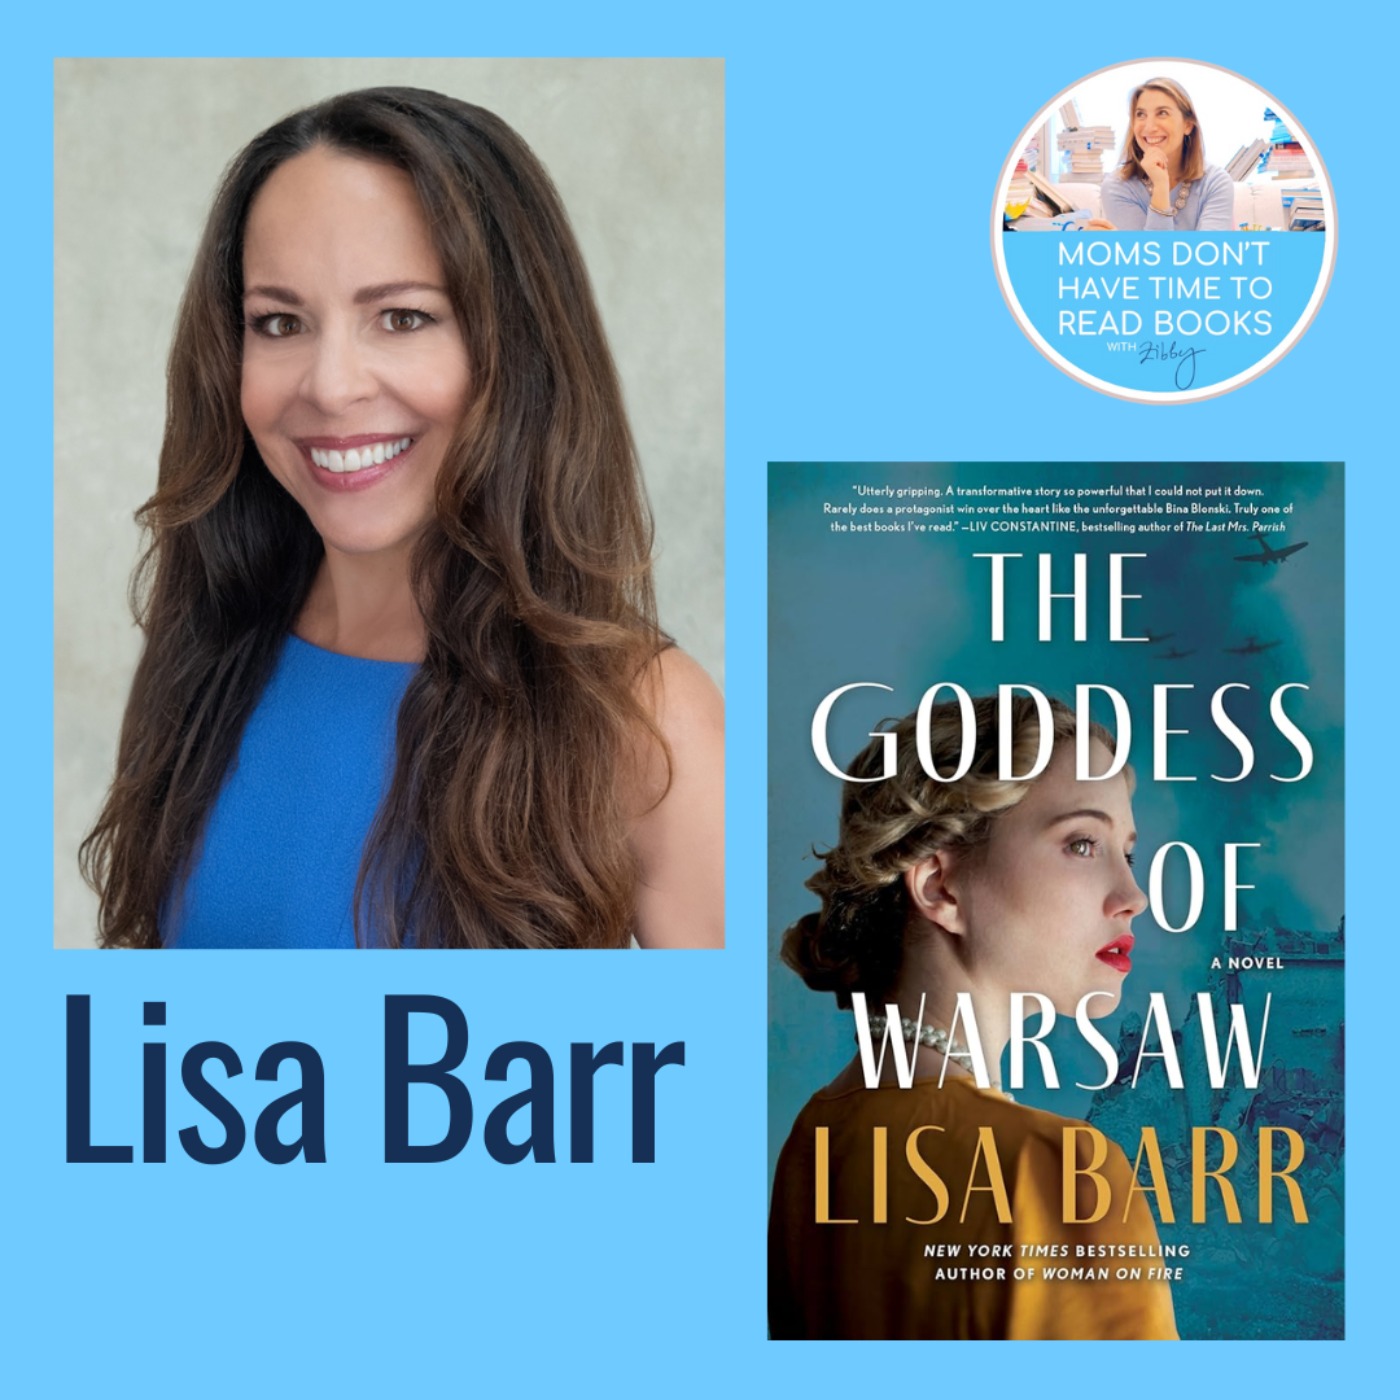 Three-peat guest!! Lisa Barr, THE GODDESS OF WARSAW